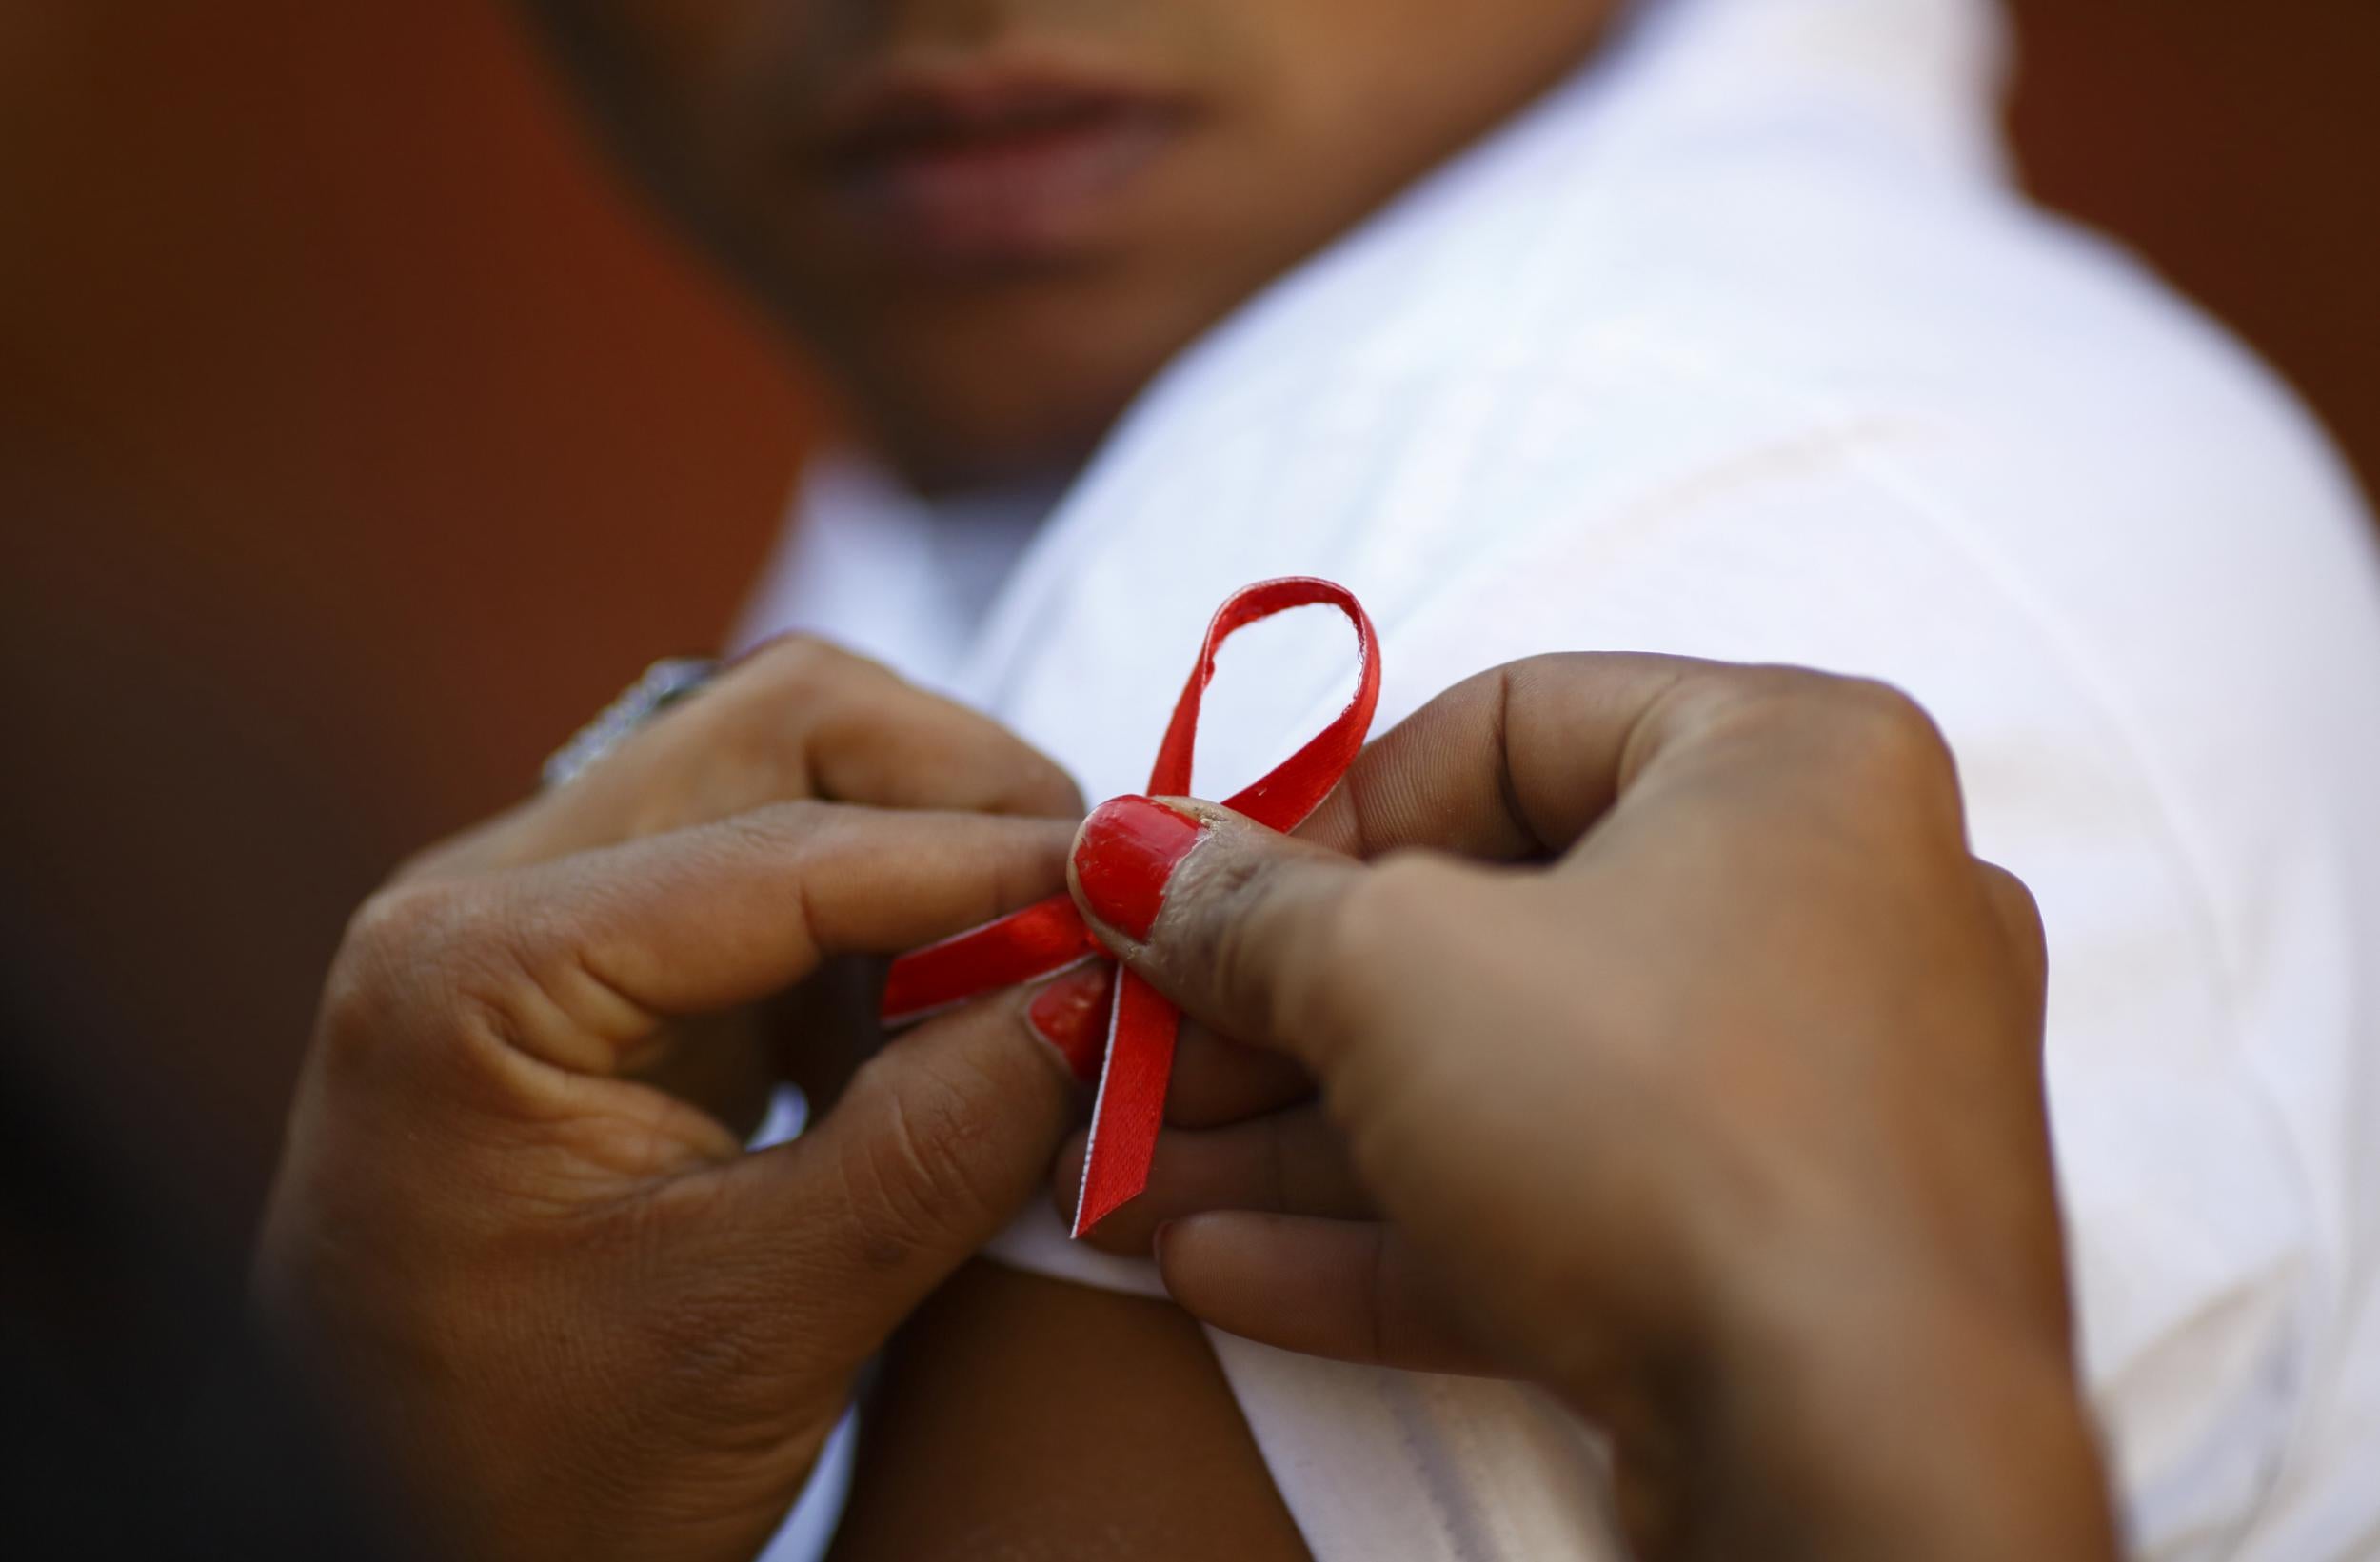 A red ribbon is put on the sleeves of a man by his friend to show support for people living with HIV